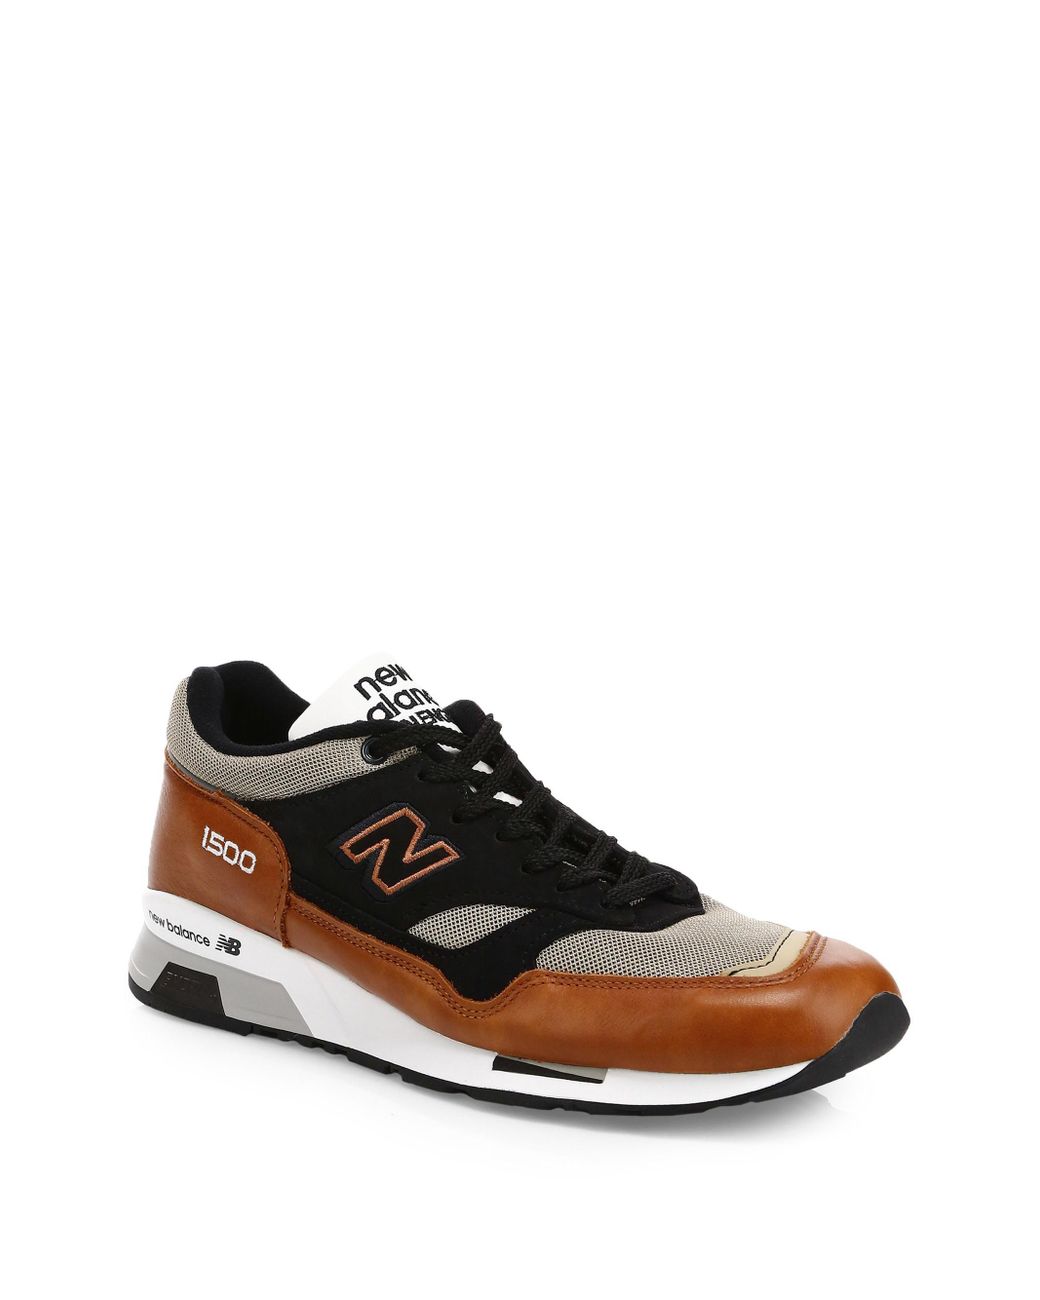 New Balance 1500 Made In Uk Leather Sneakers in Brown for Men | Lyst